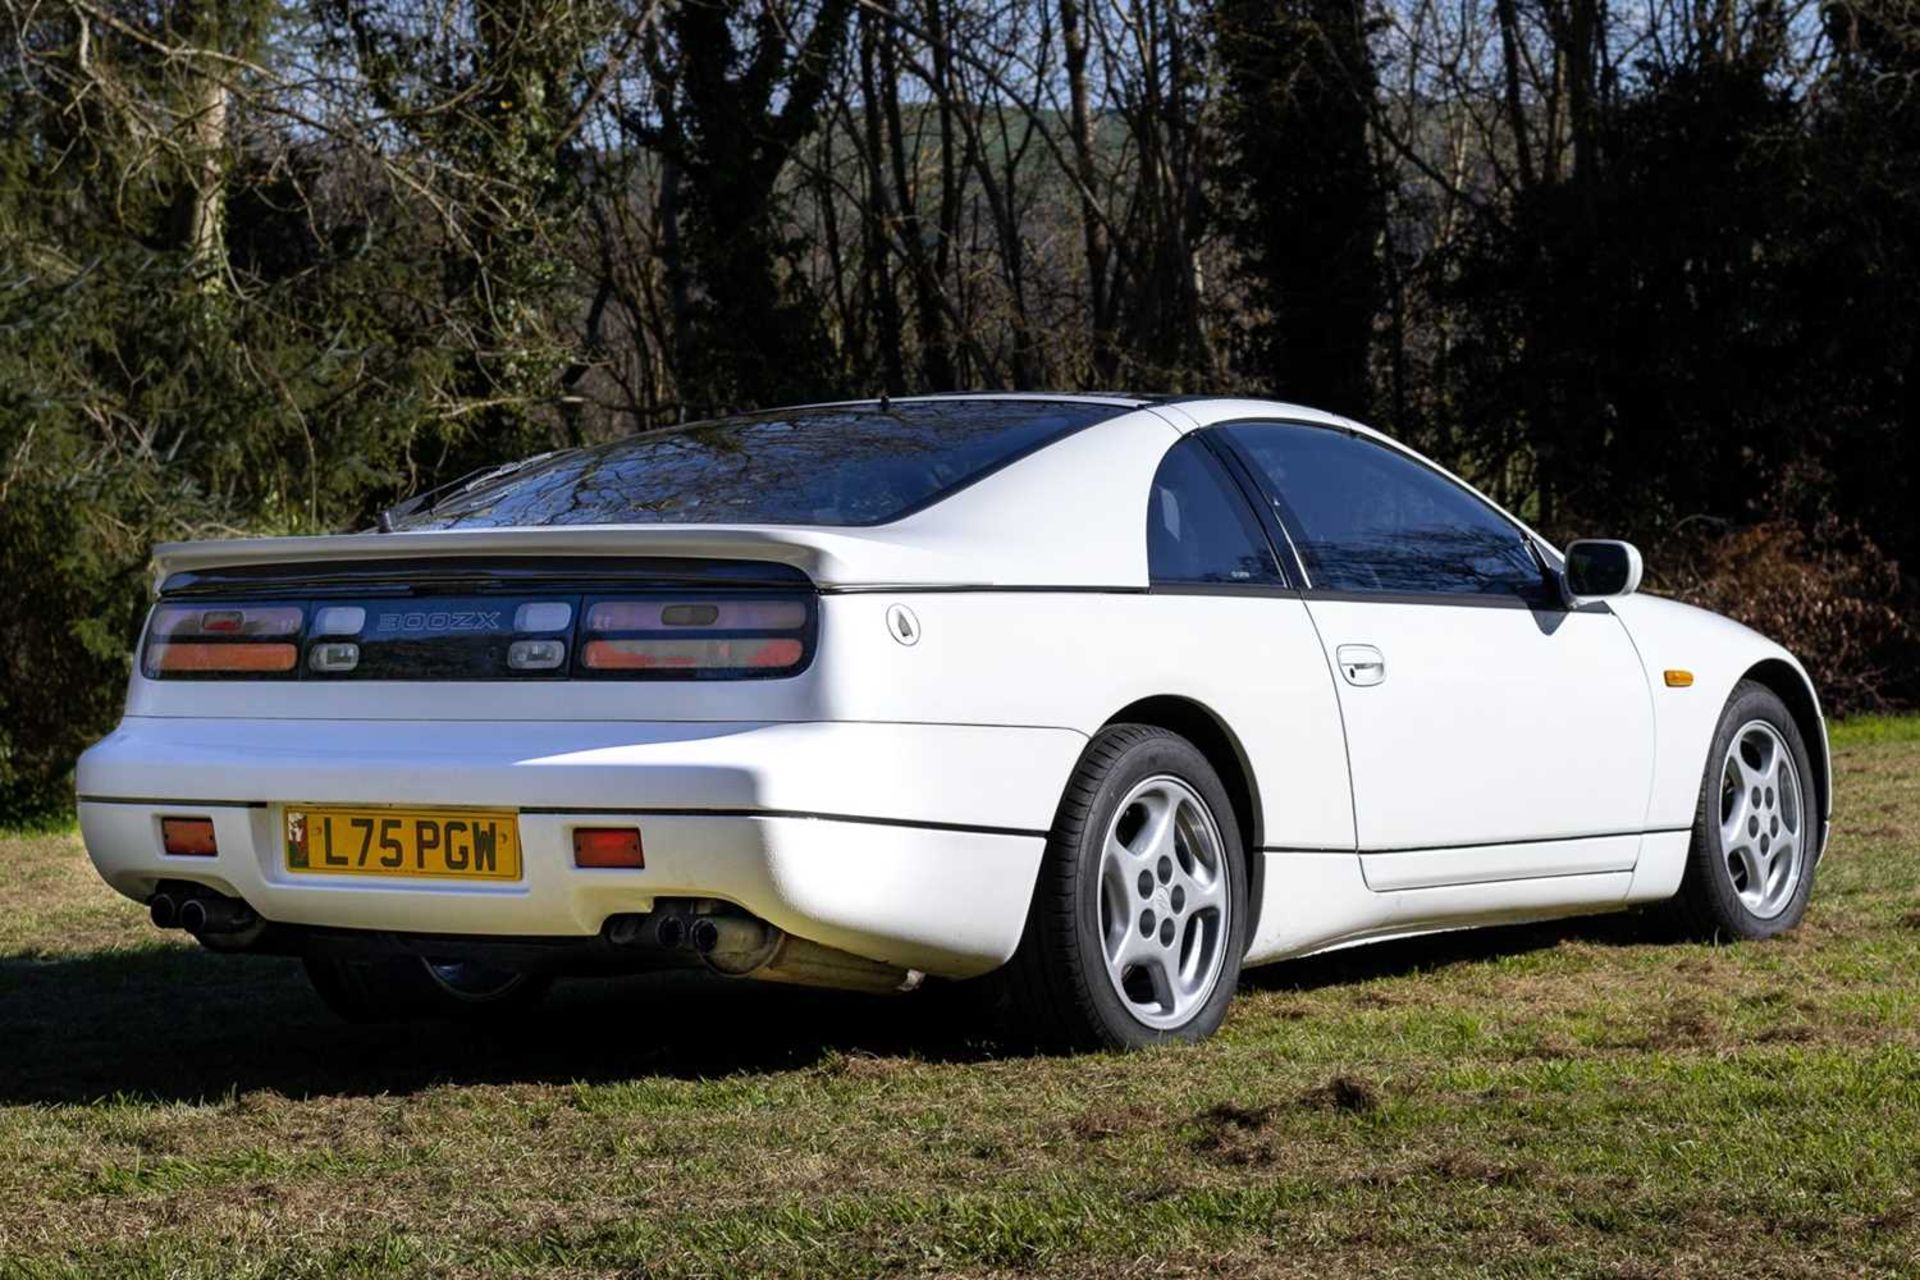 1990 Nissan 300ZX Turbo 2+2 Targa One of the last examples registered in the UK - Image 14 of 89